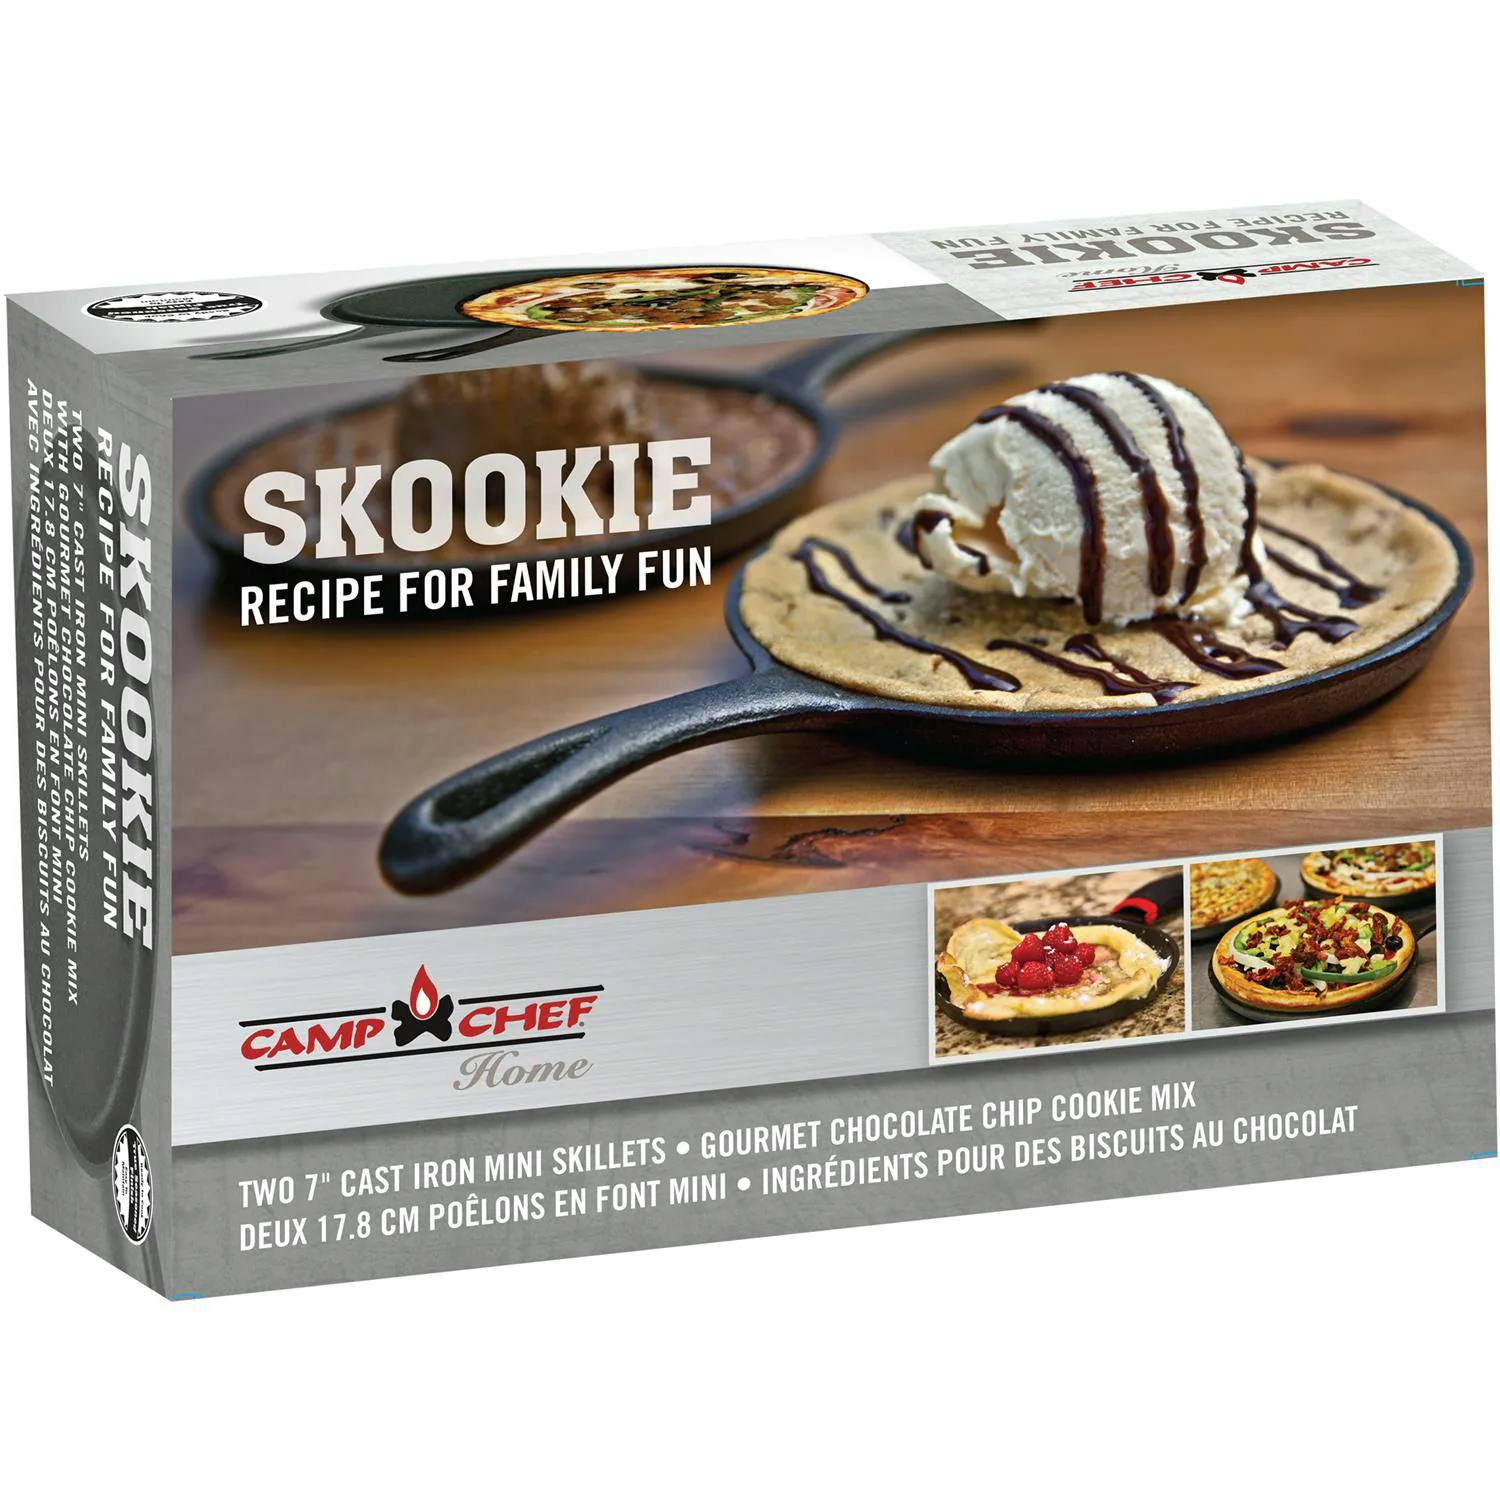 Camp Chef Skookie Mini Skillet 2 Pack with Grip Handles and Chocolate Chip Cookie Mix